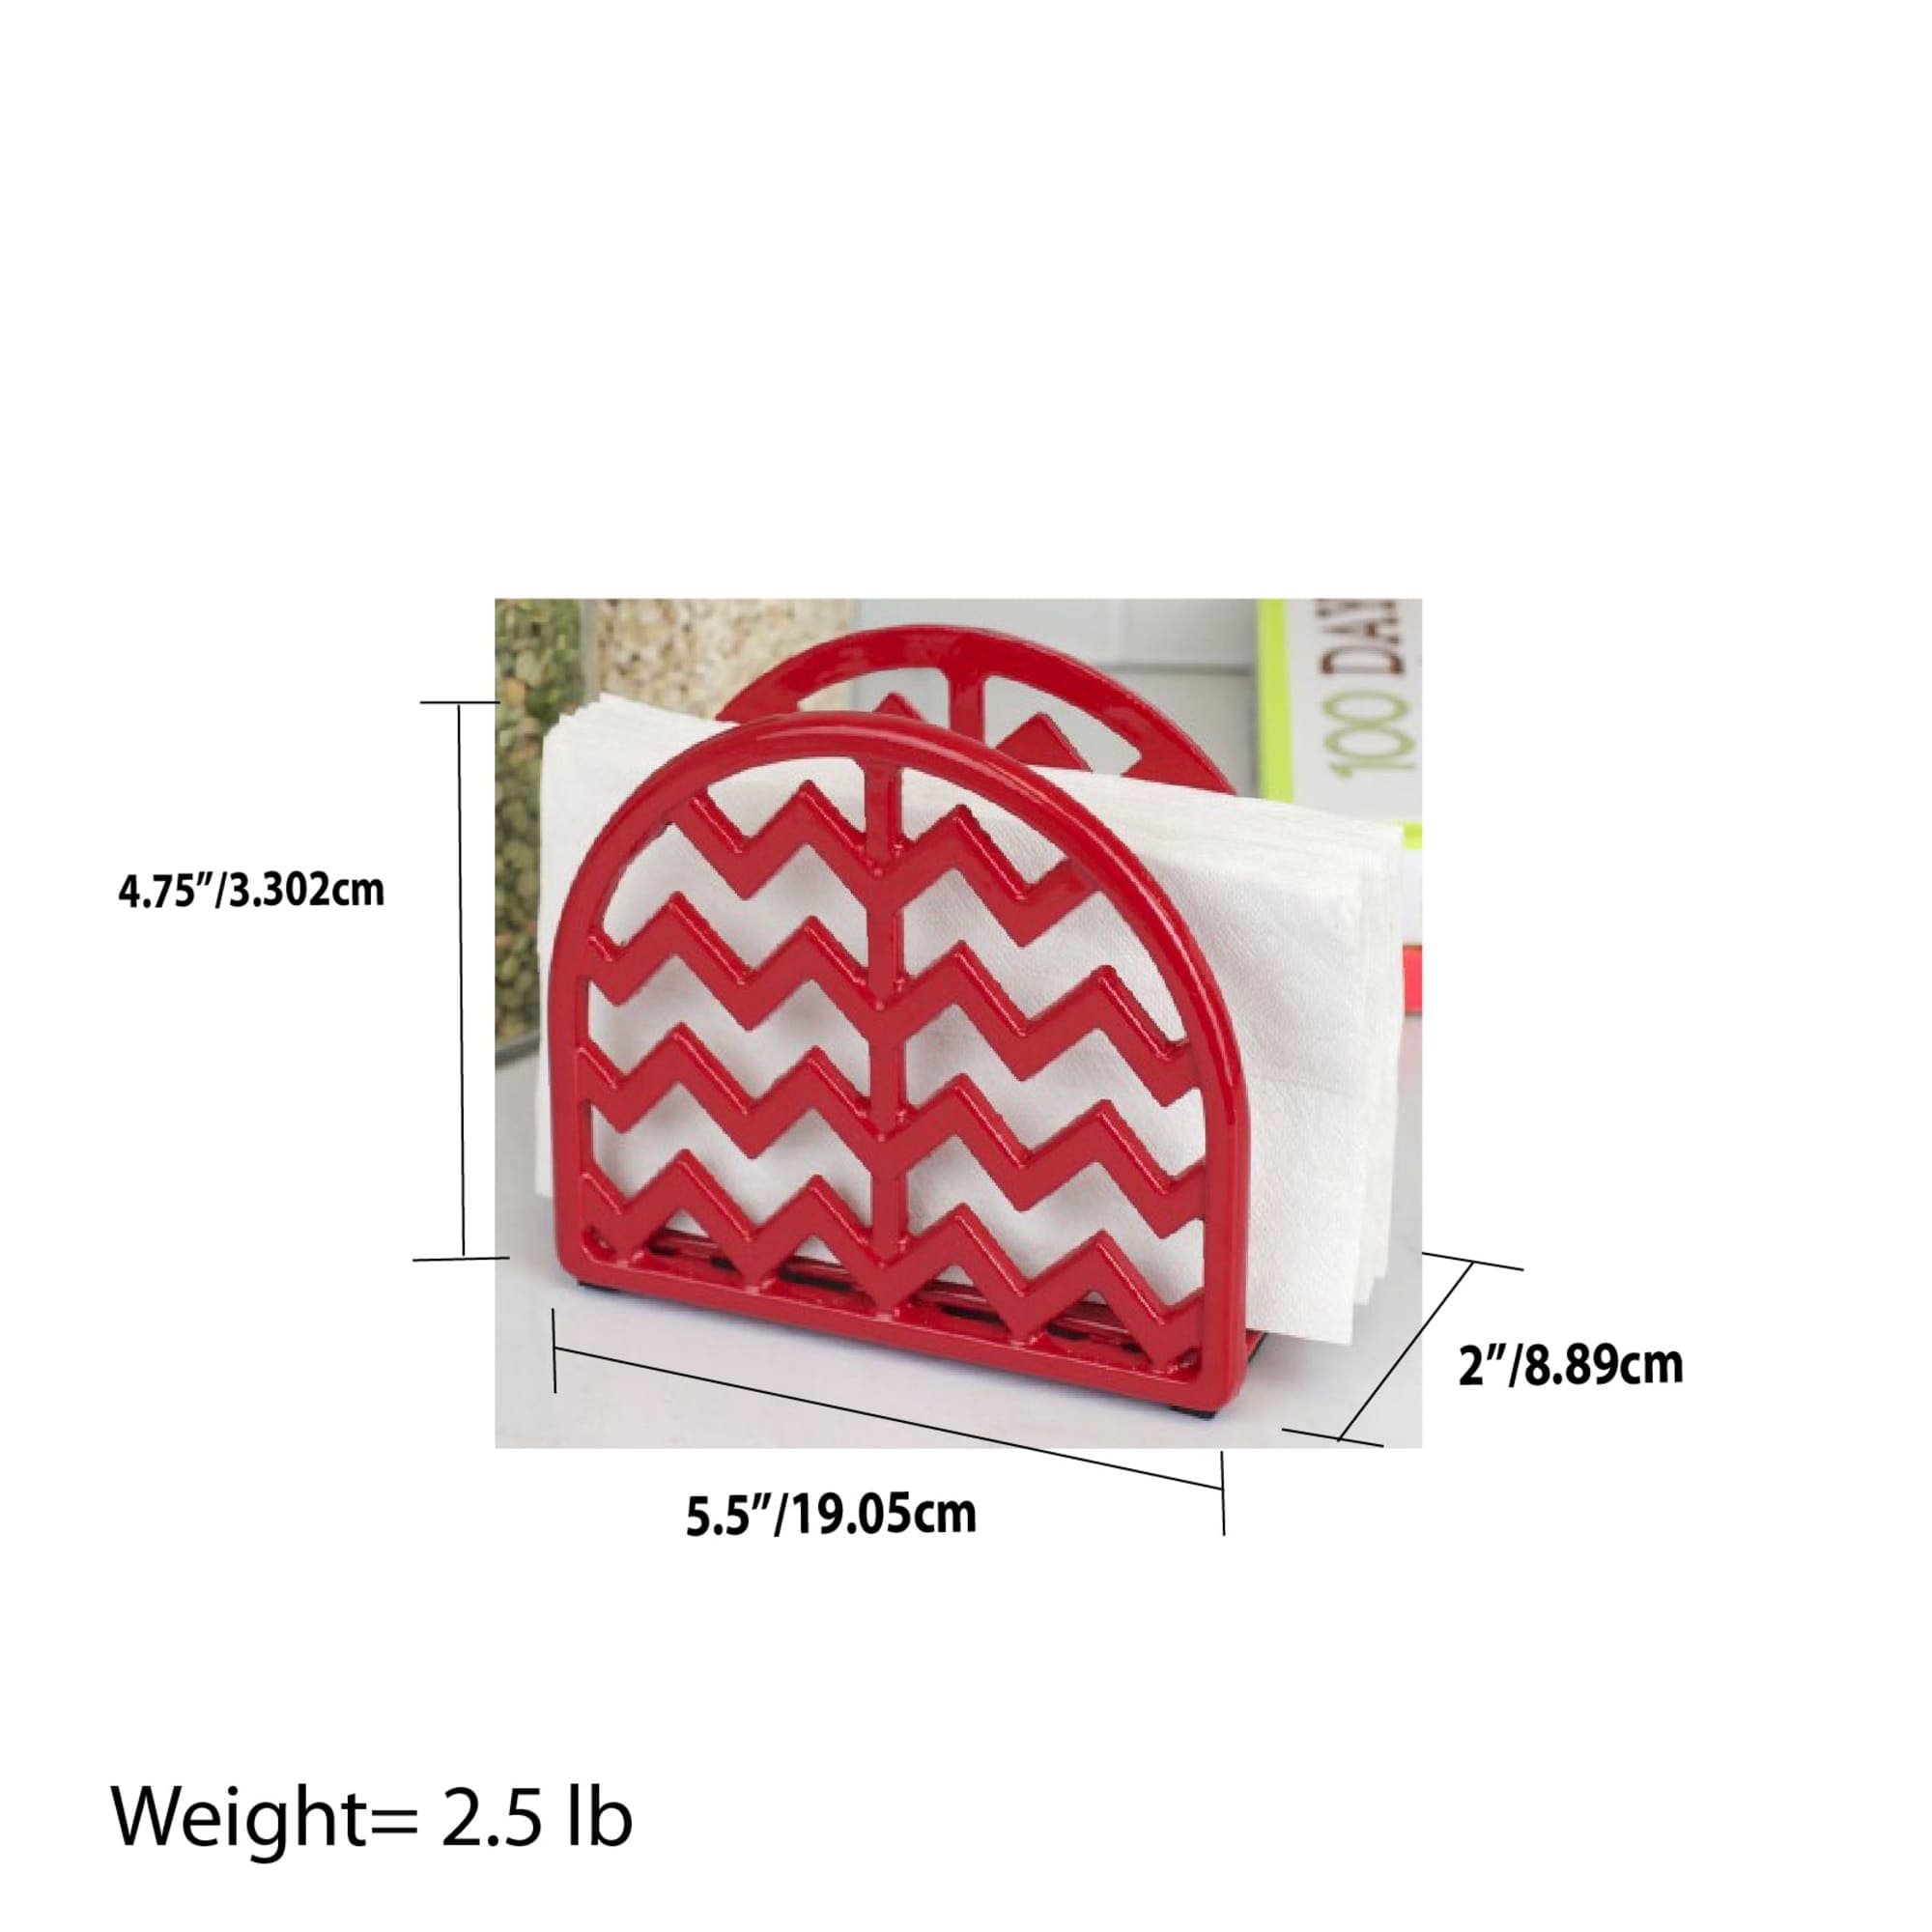 Home Basics Chevron Collection Cast Iron Napkin Holder, Red $7.00 EACH, CASE PACK OF 6